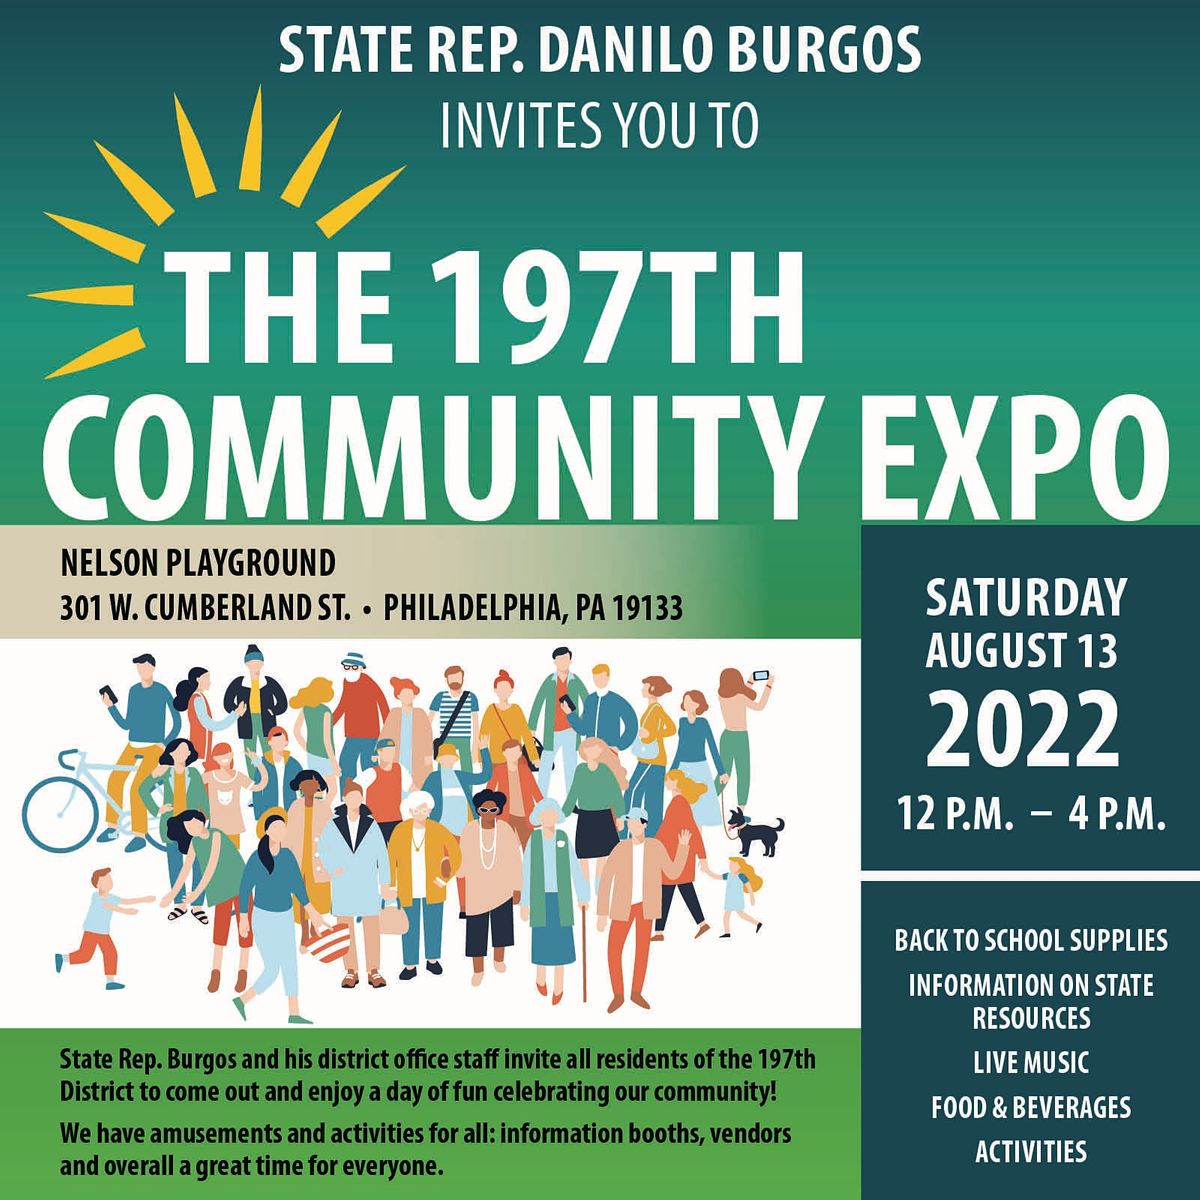 The 197th Community Expo